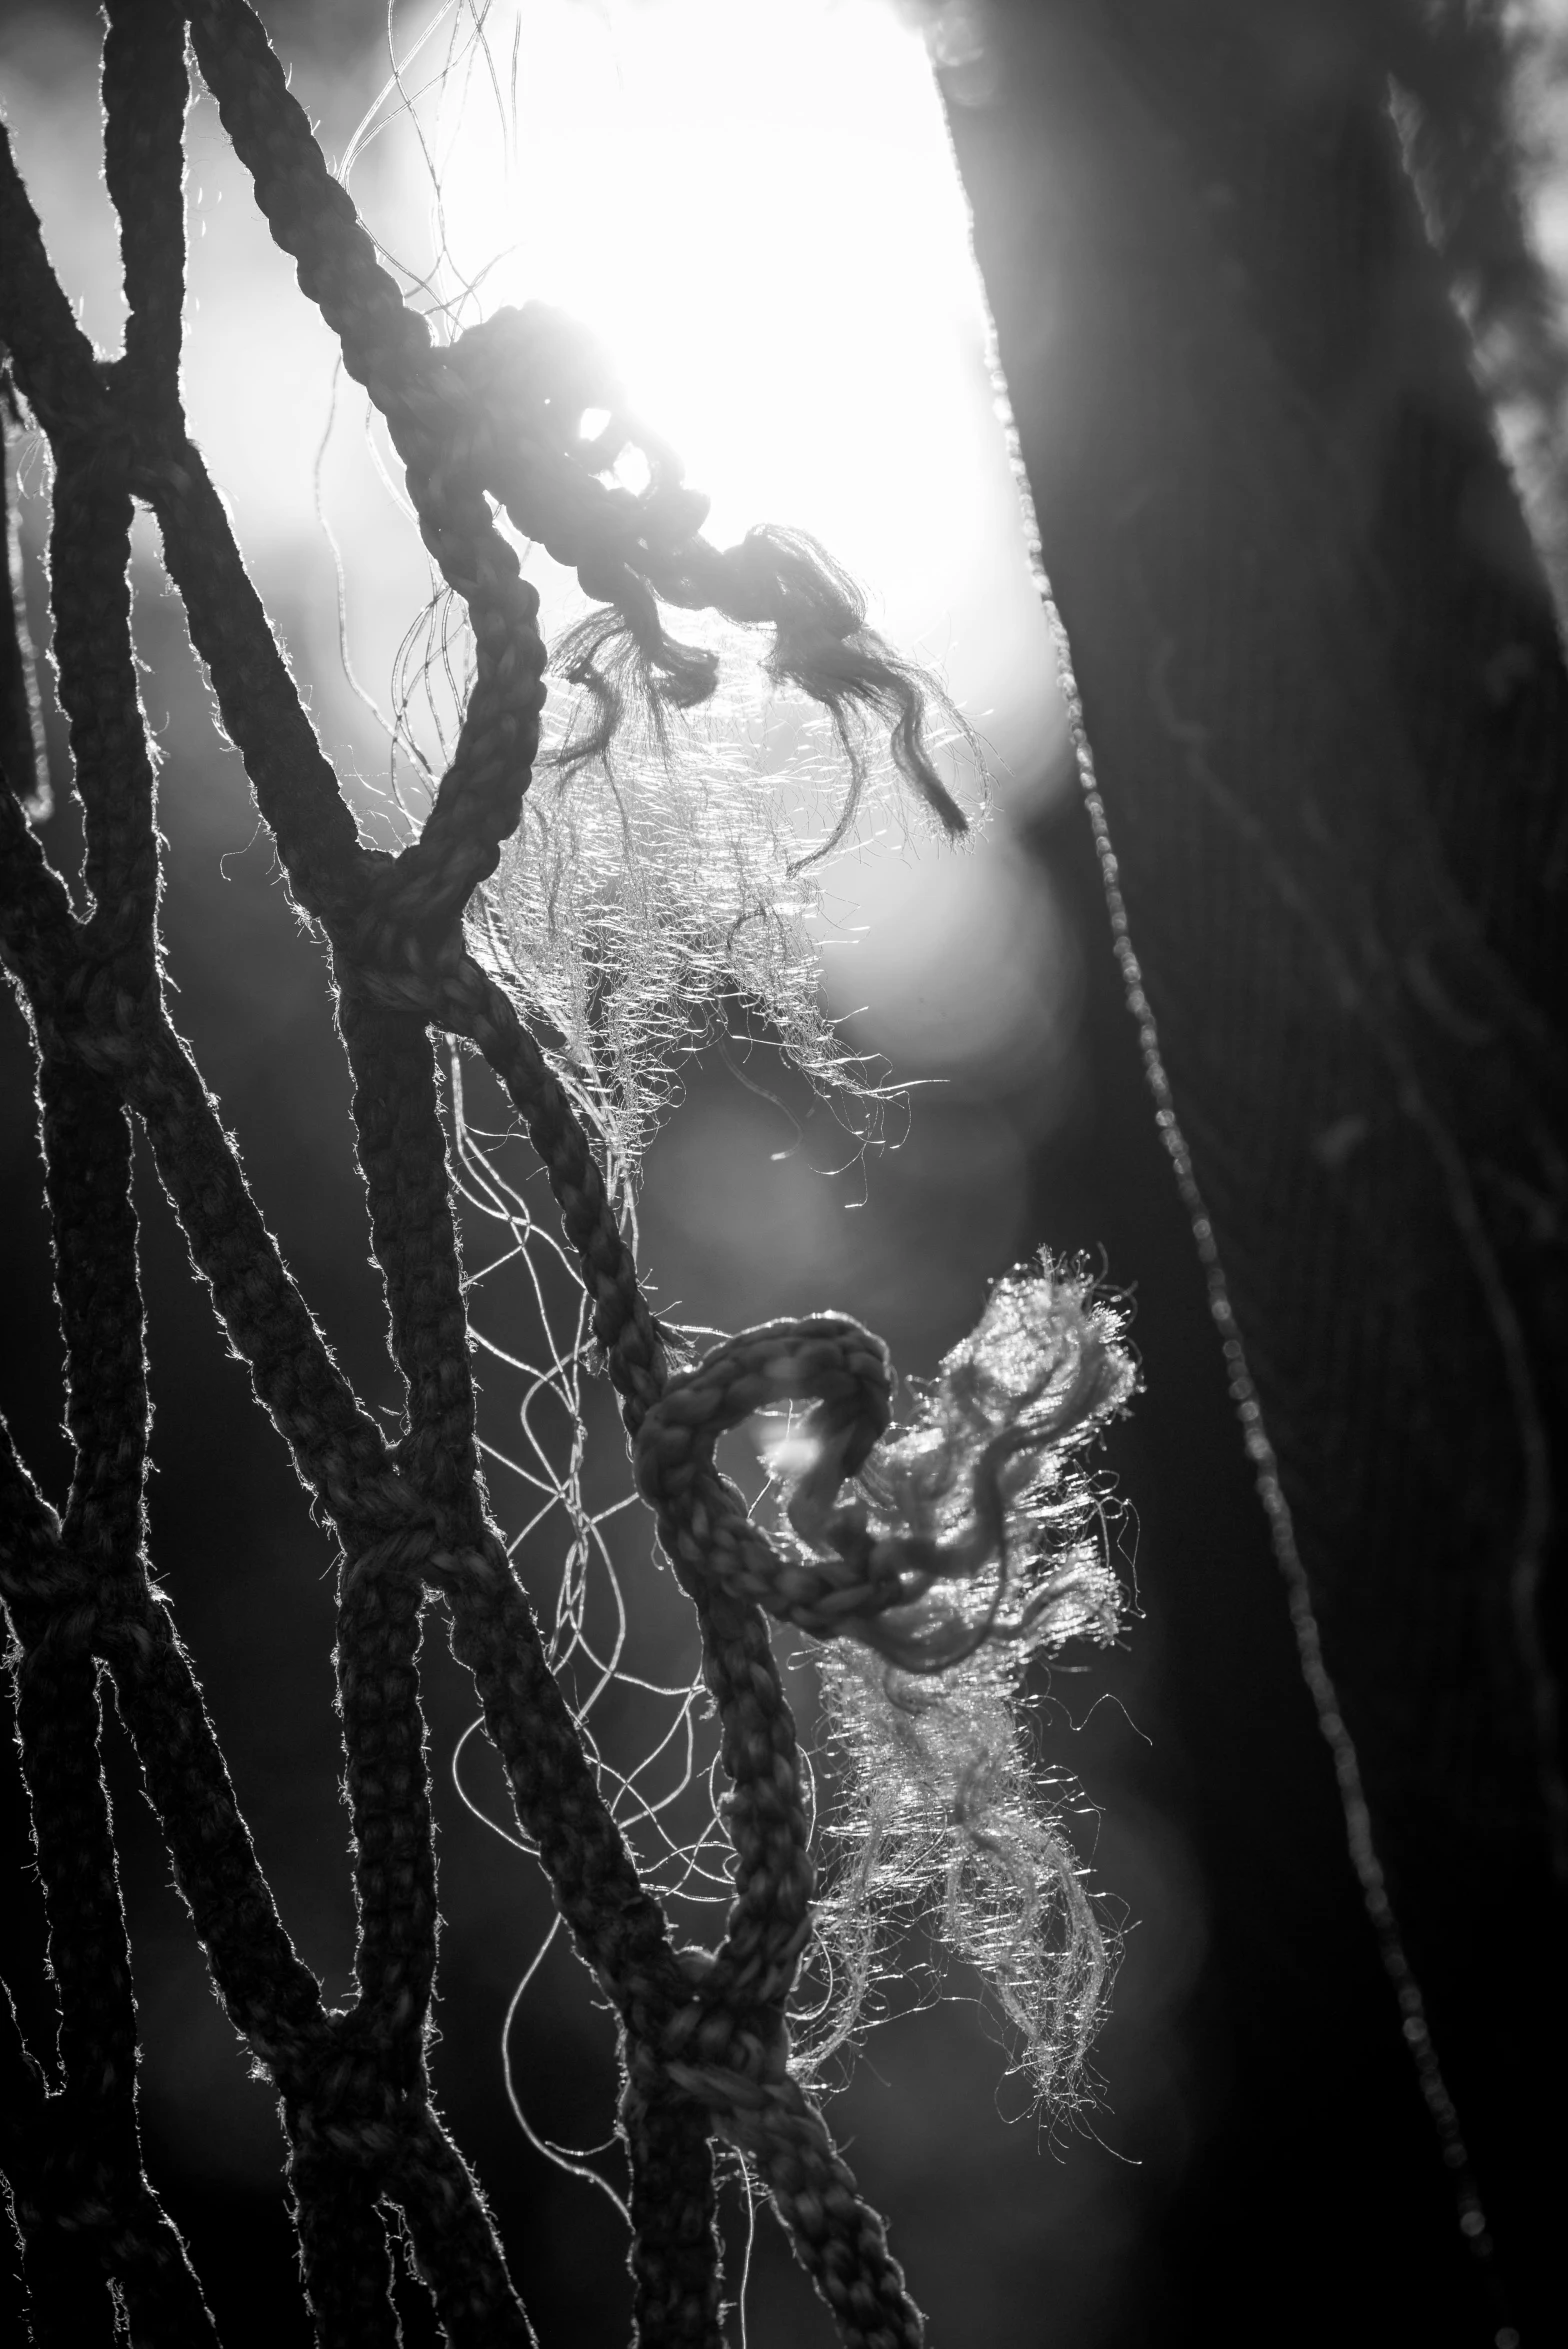 sunlight shines through spider web on the nches of a tree